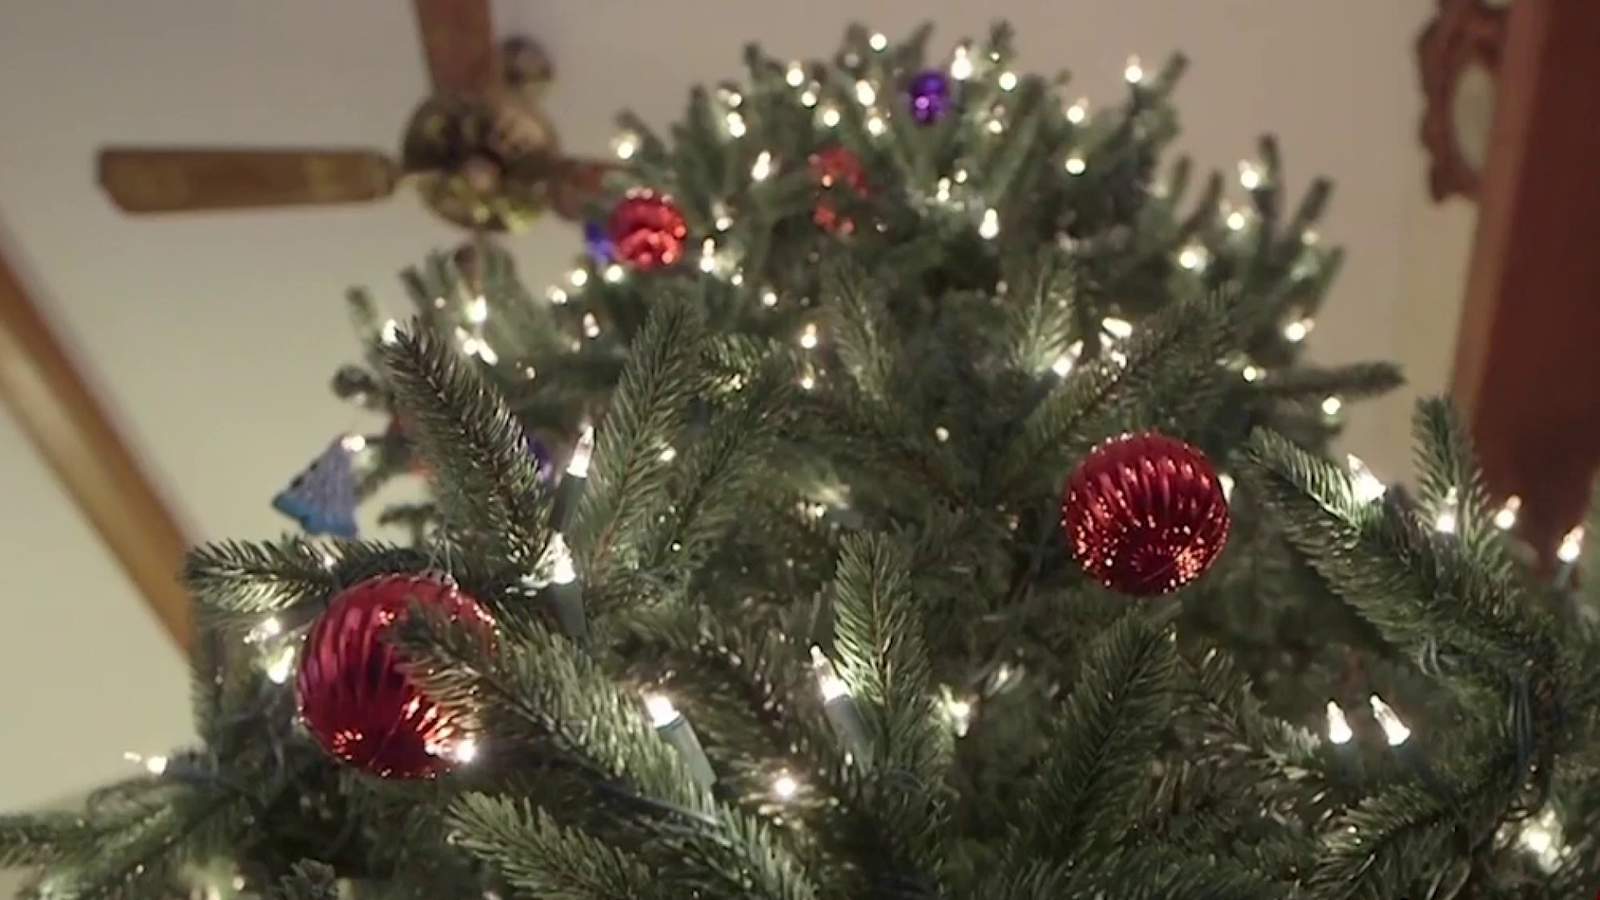 Here’s how to safely decorate for the holidays